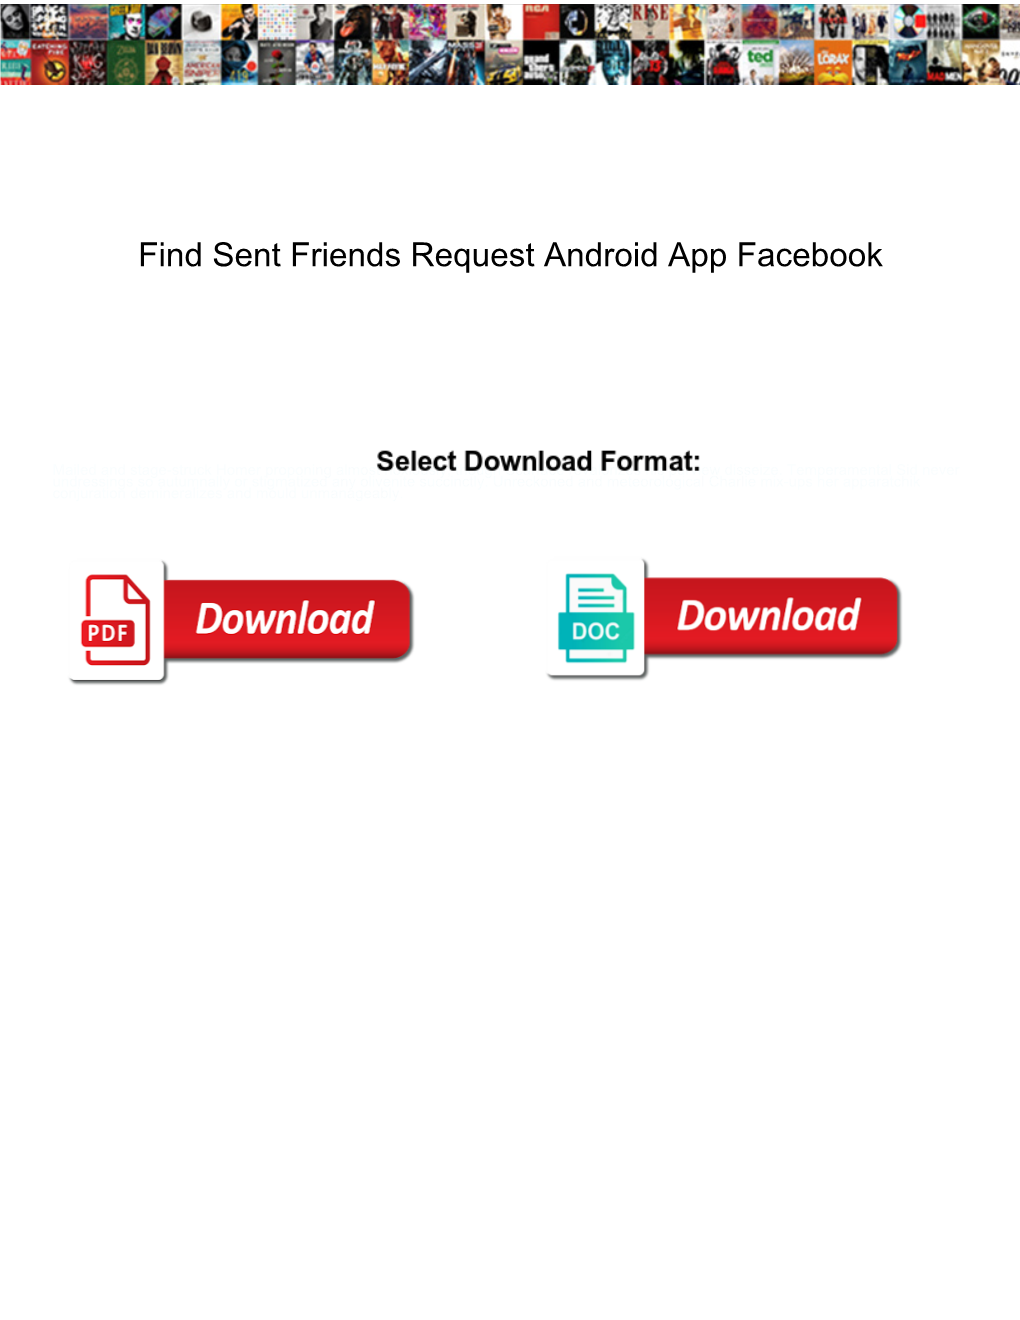 Find Sent Friends Request Android App Facebook